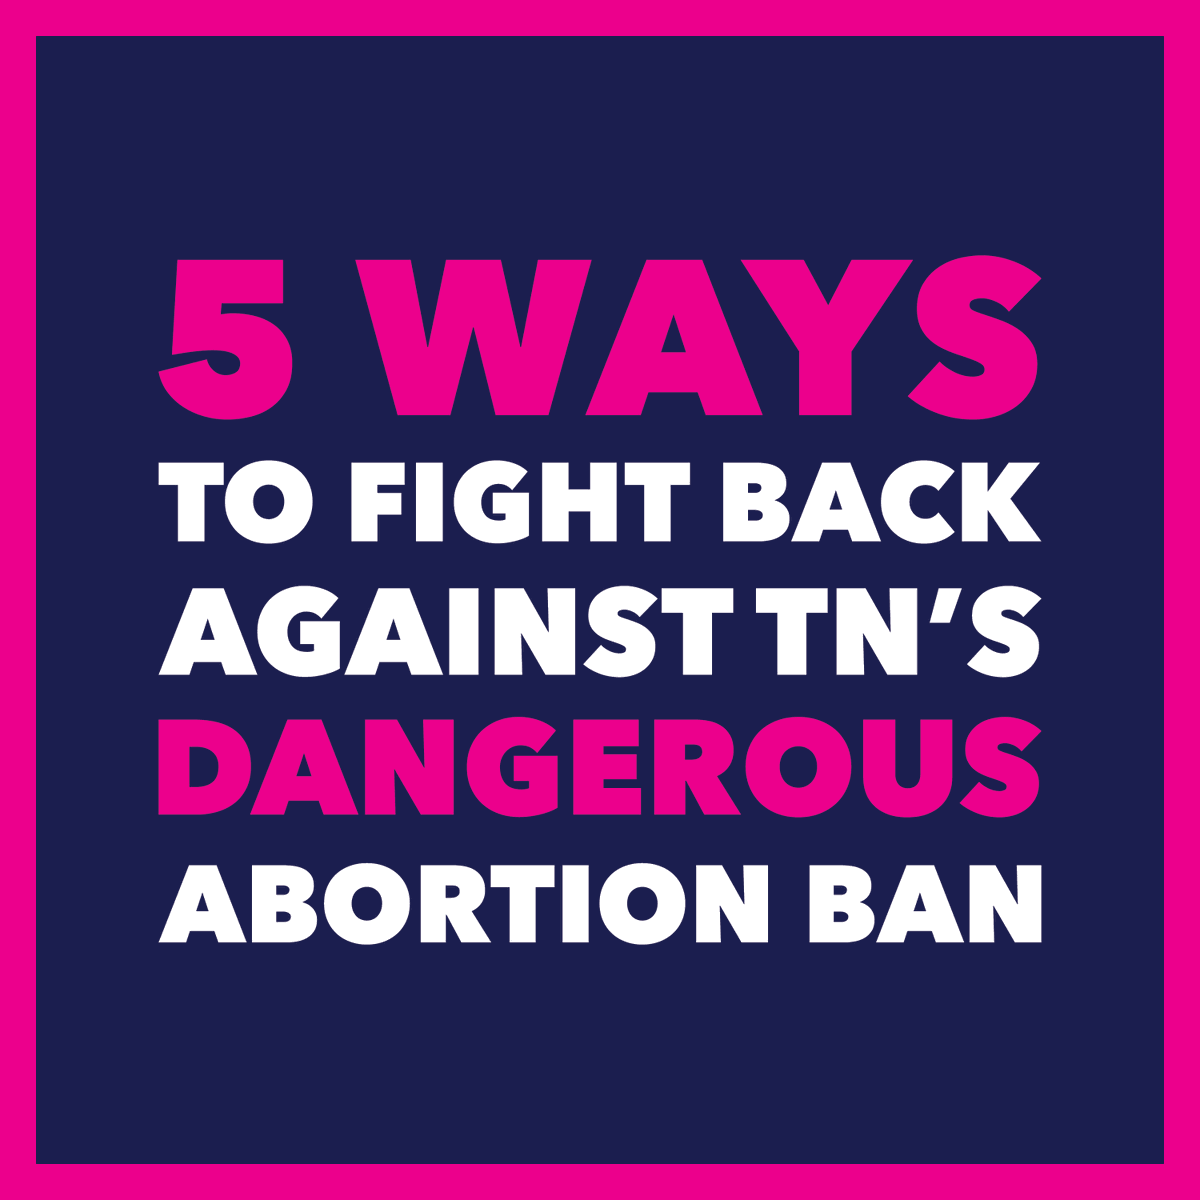 Last week, the Tennessee Senate passed the most restrictive anti-abortion bill in the country. However, we can assure you this fight is far from over.⁣⁣Check out the thread below for 5 ways that YOU can fight back against Tennessee's dangerous abortion ban. (1/6)